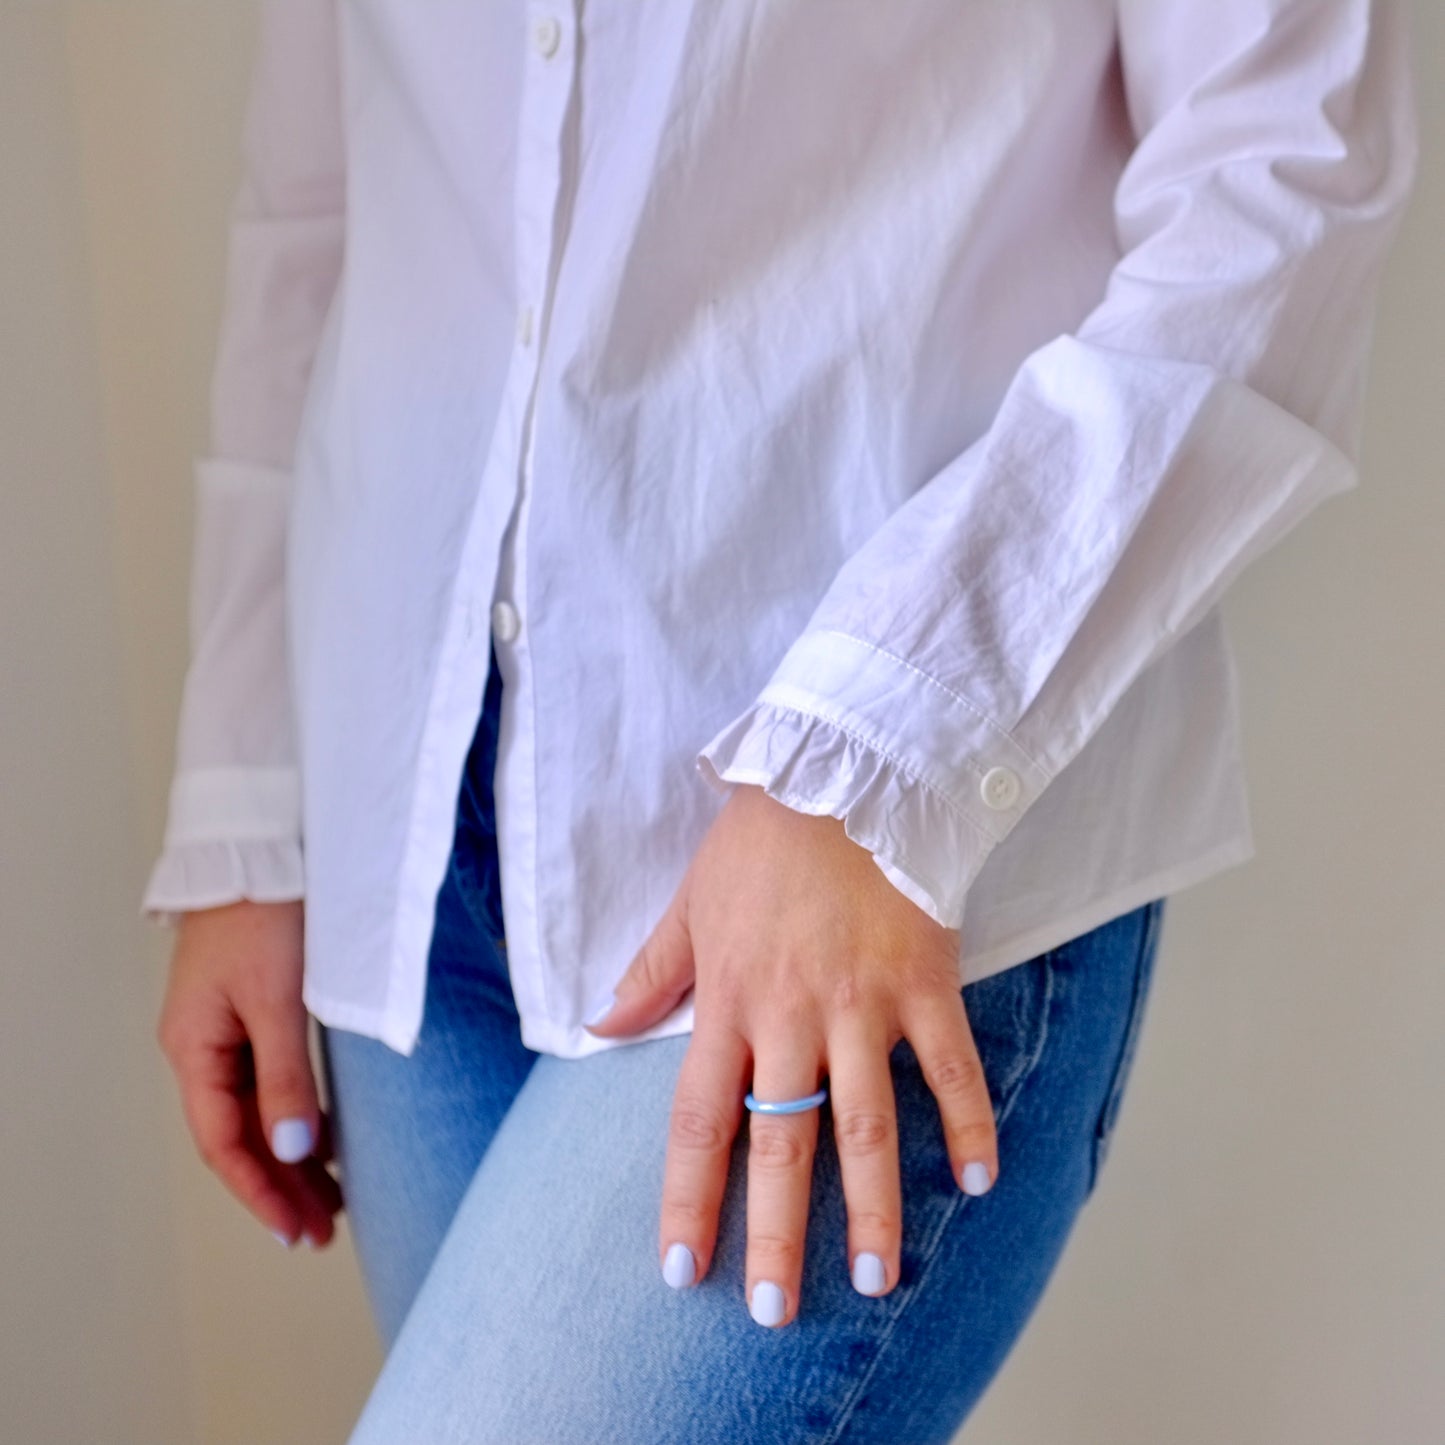 White Button-up with Lace Detail